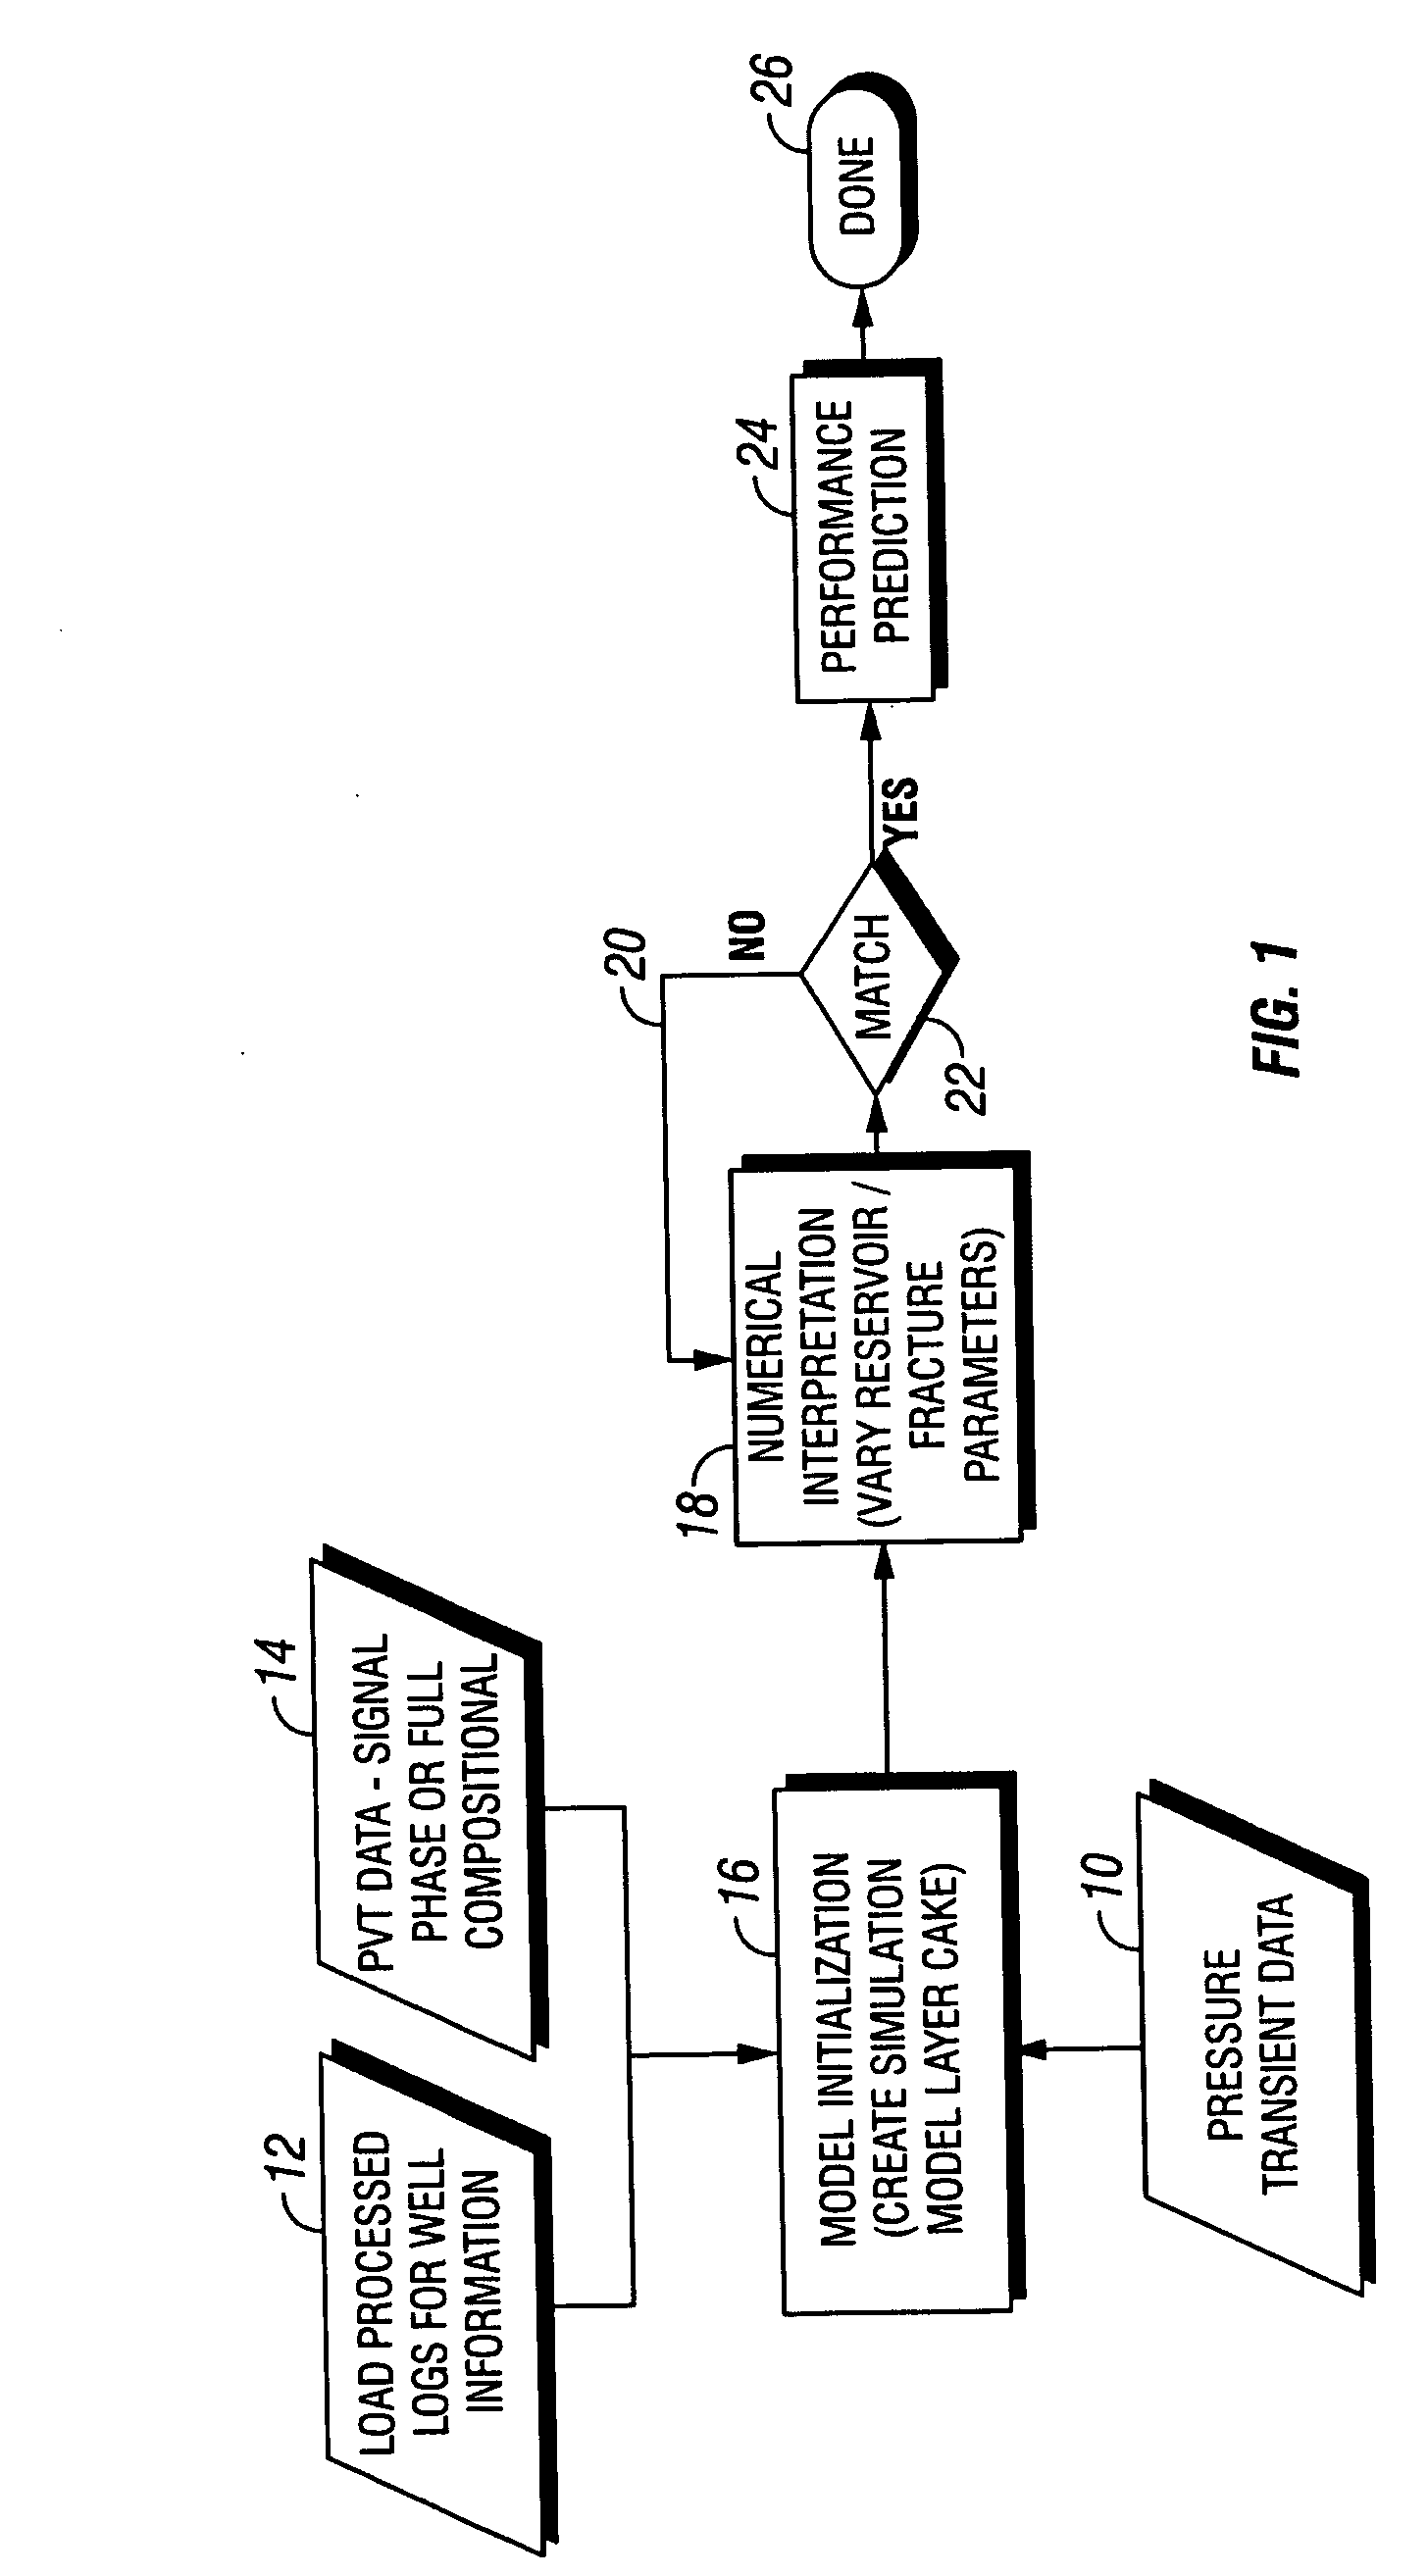 Method for simulation modeling of well fracturing